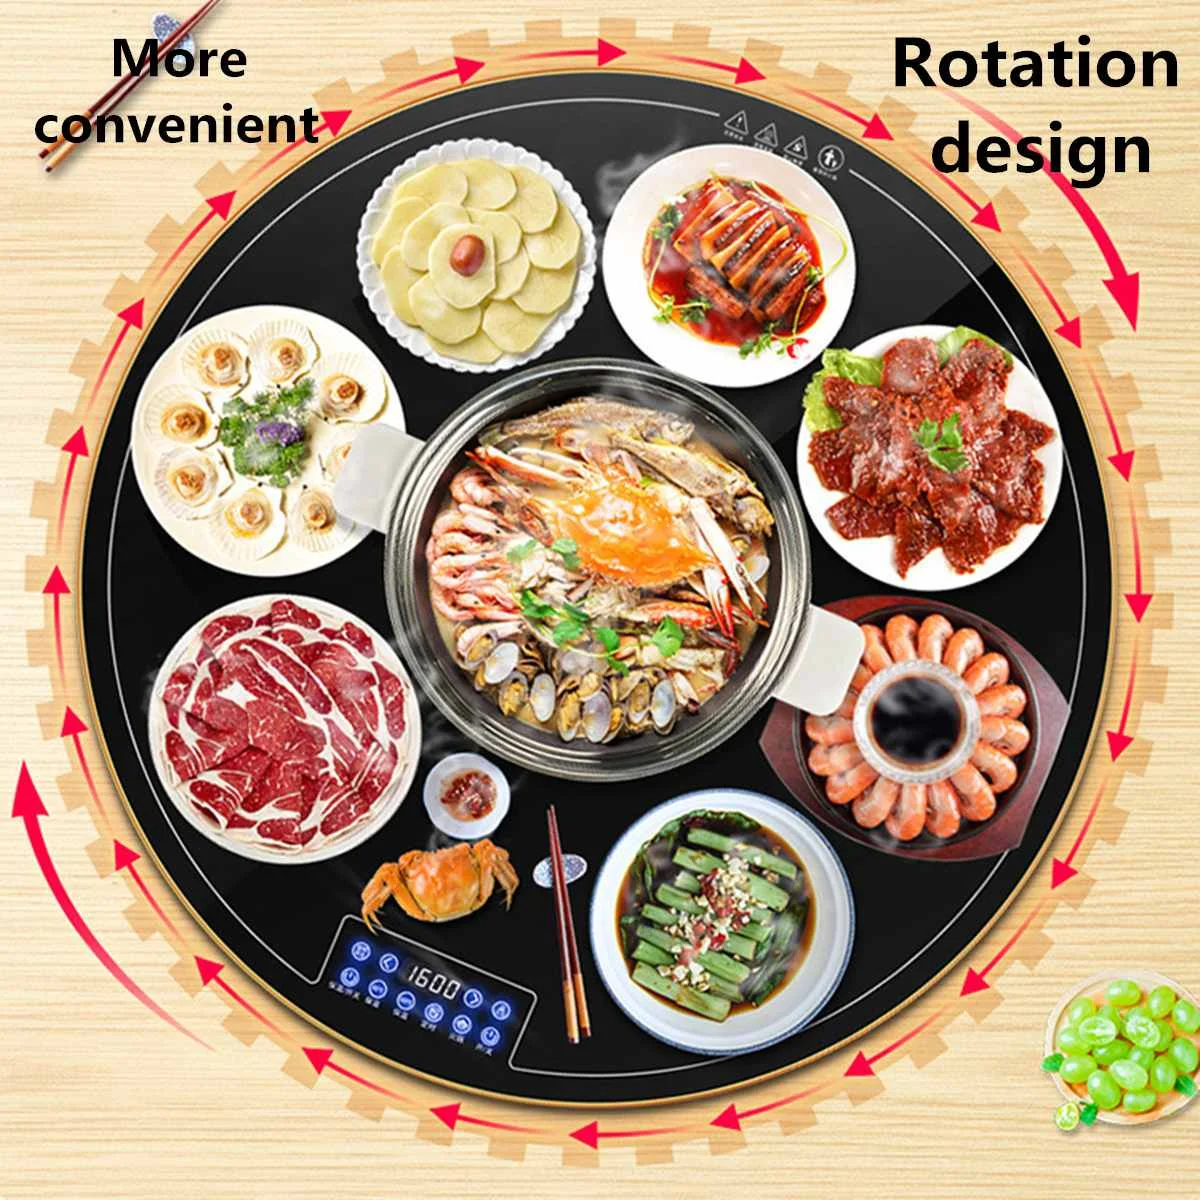 Hot Pot Household Multi-functional Hot Meals Insulation Board Dish Machine Heating Board Intelligent Heating Food Hot Food Table